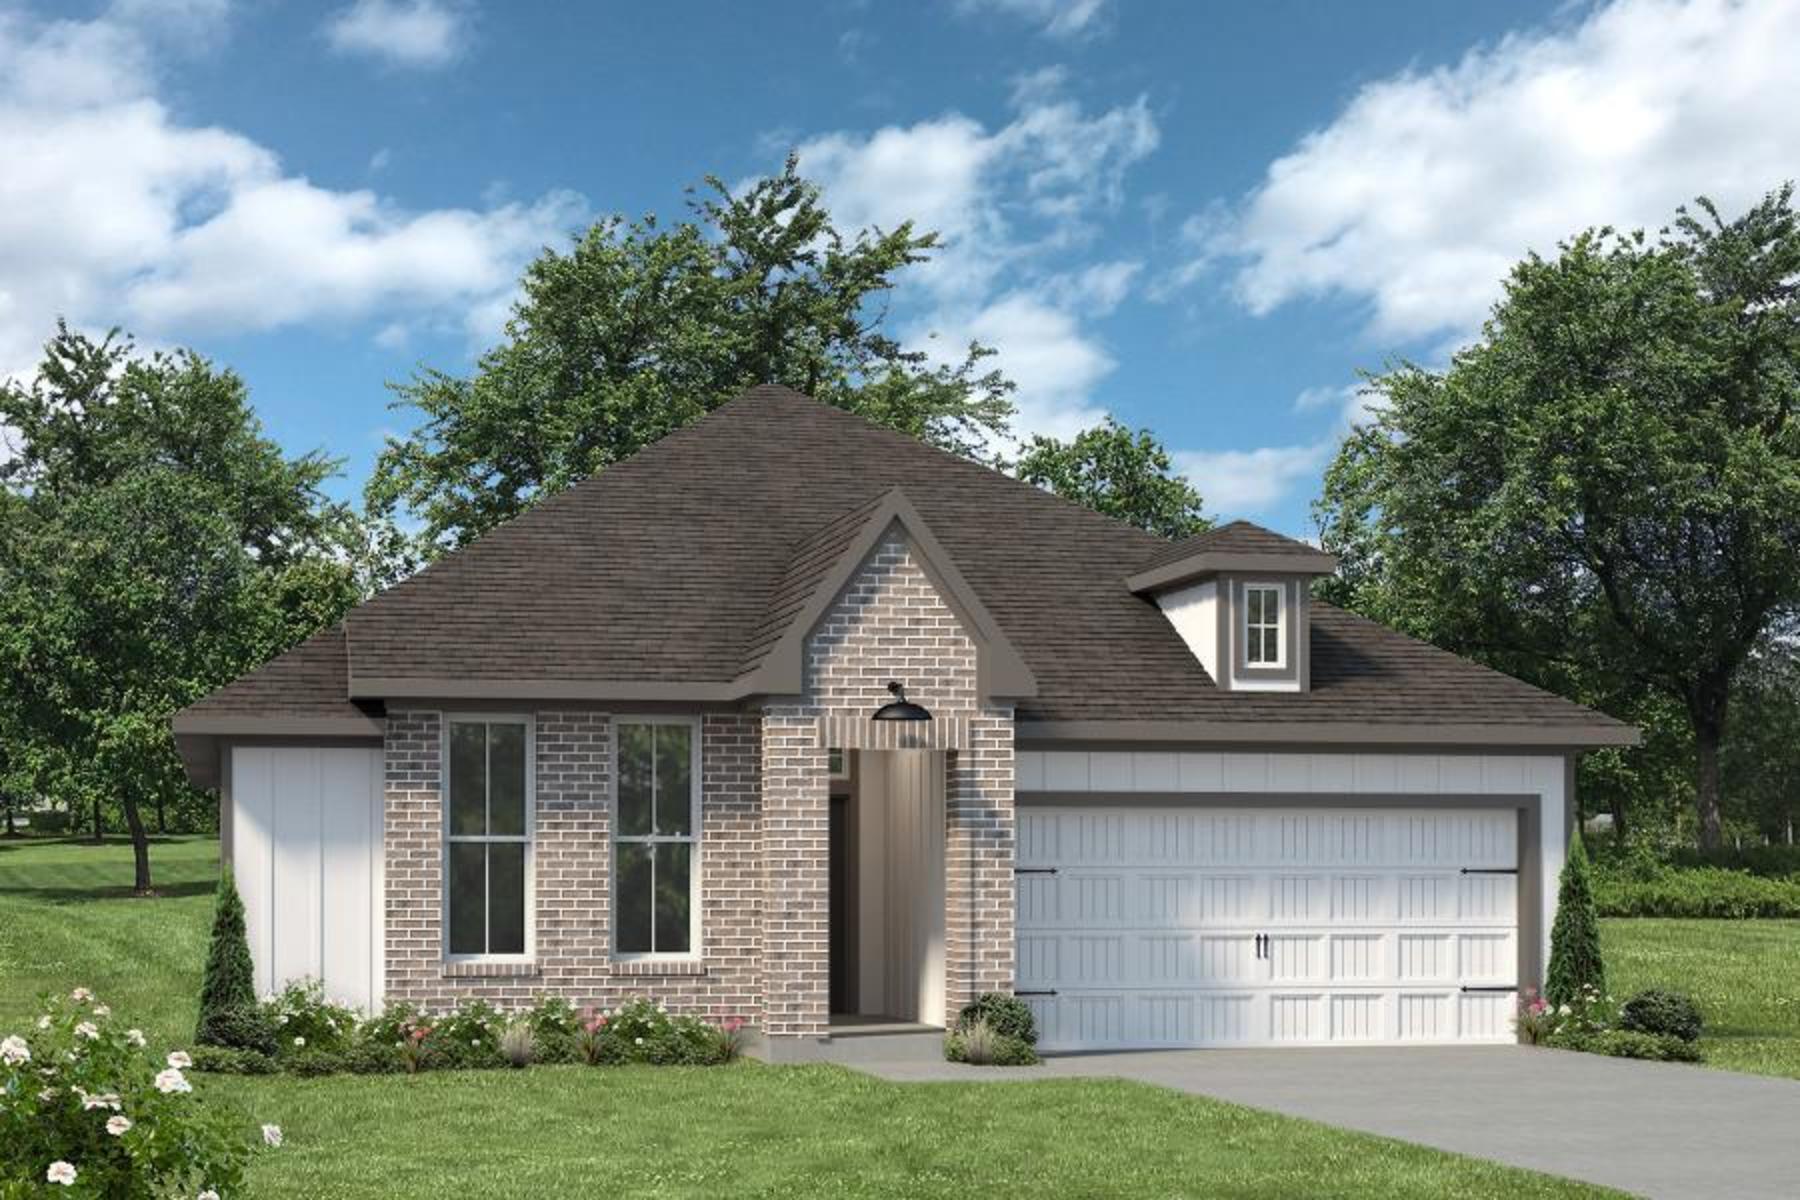 https://myhome.anewgo.com/client/stylecraft/community/Build%20On%20Your%20Lot/plan/1514%20%7C%20Bedford%20Modern?elevId=70. Bedford Home with 3 Bedrooms